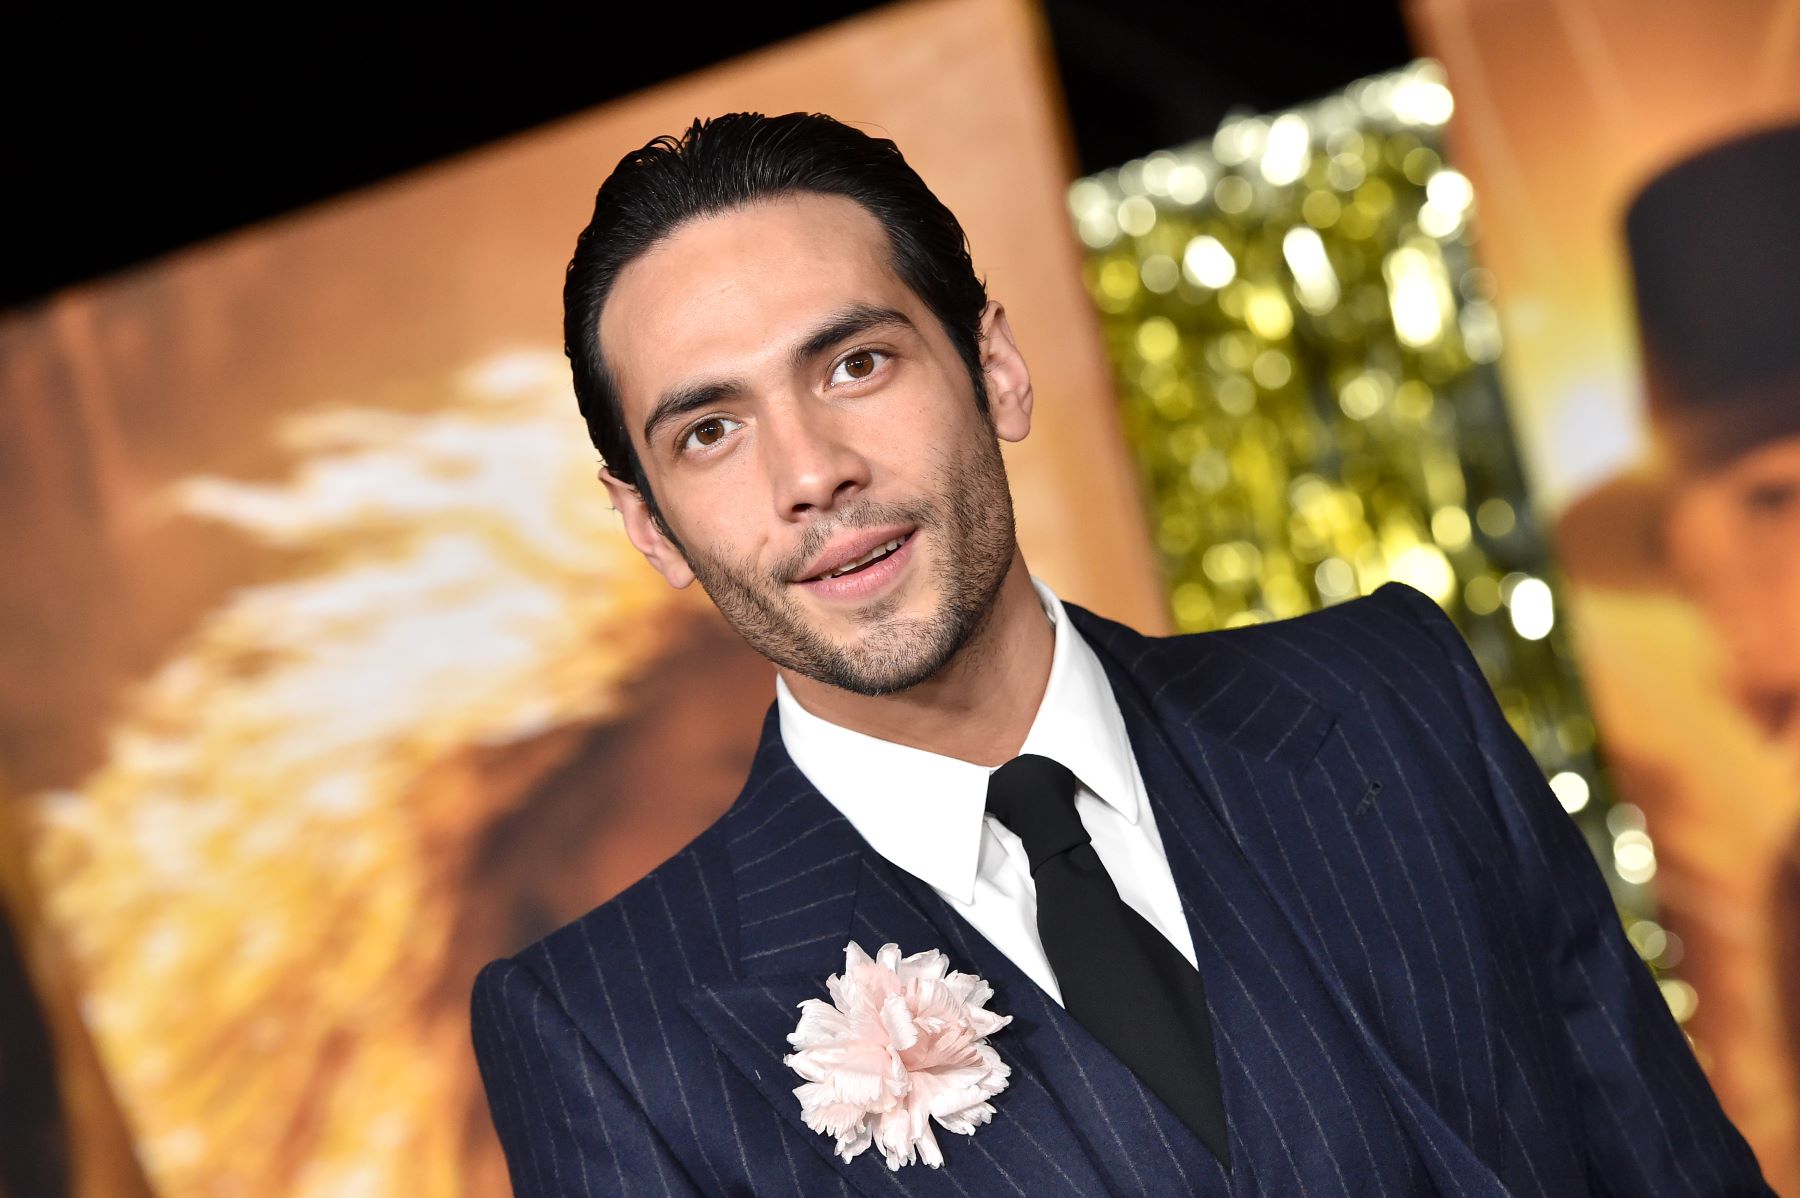 ‘Babylon’ Actor Diego Calva Reveals Playing Pokémon Cards on-Set Helps Him Stay Focused